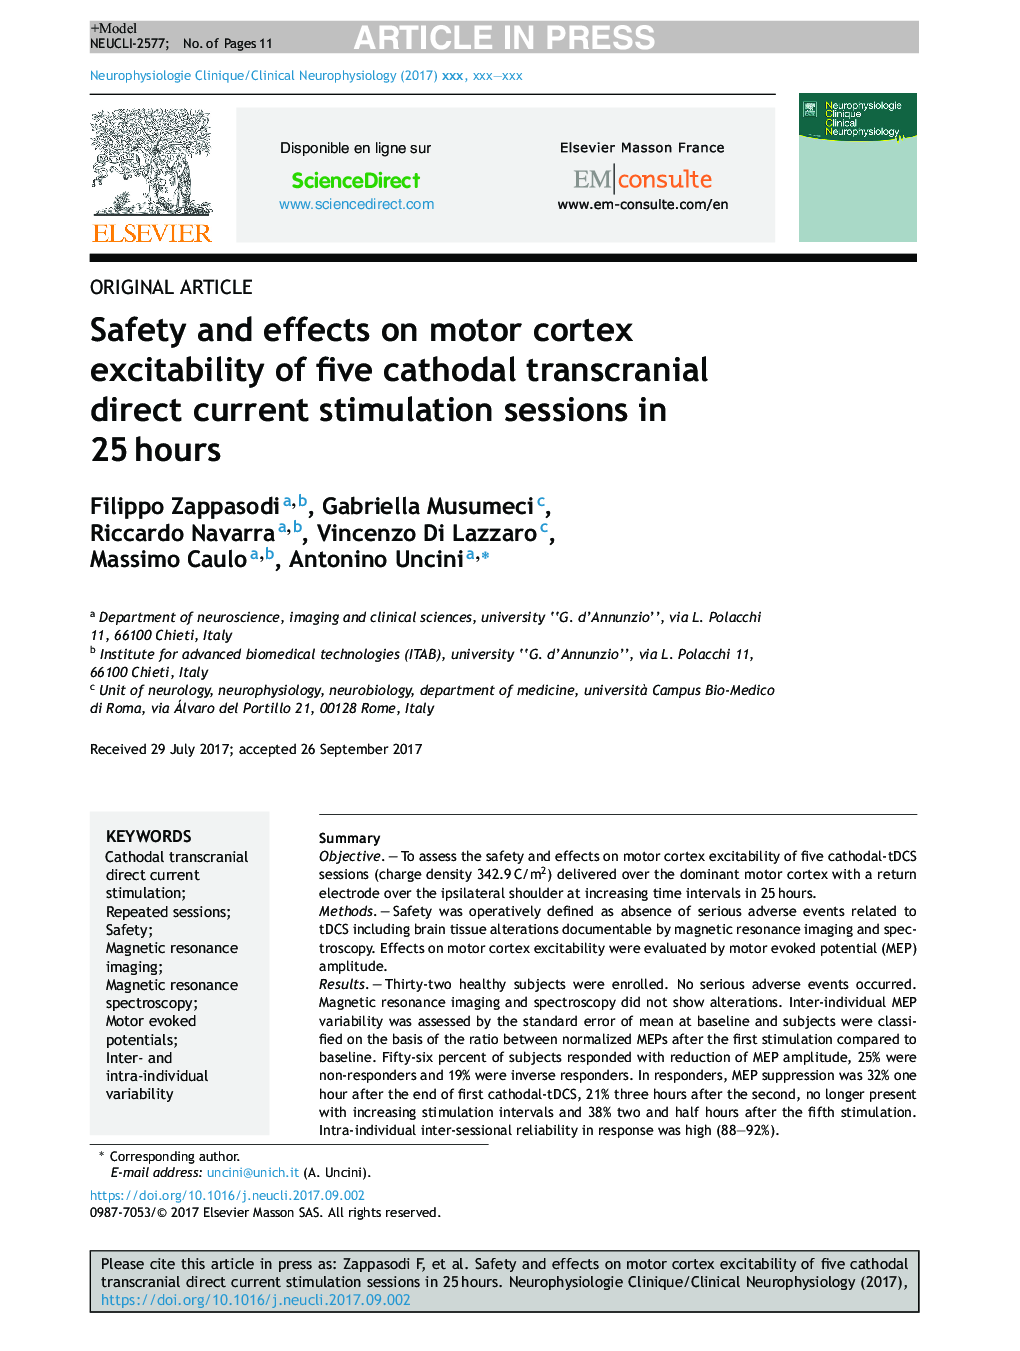 Safety and effects on motor cortex excitability of five cathodal transcranial direct current stimulation sessions in 25Â hours